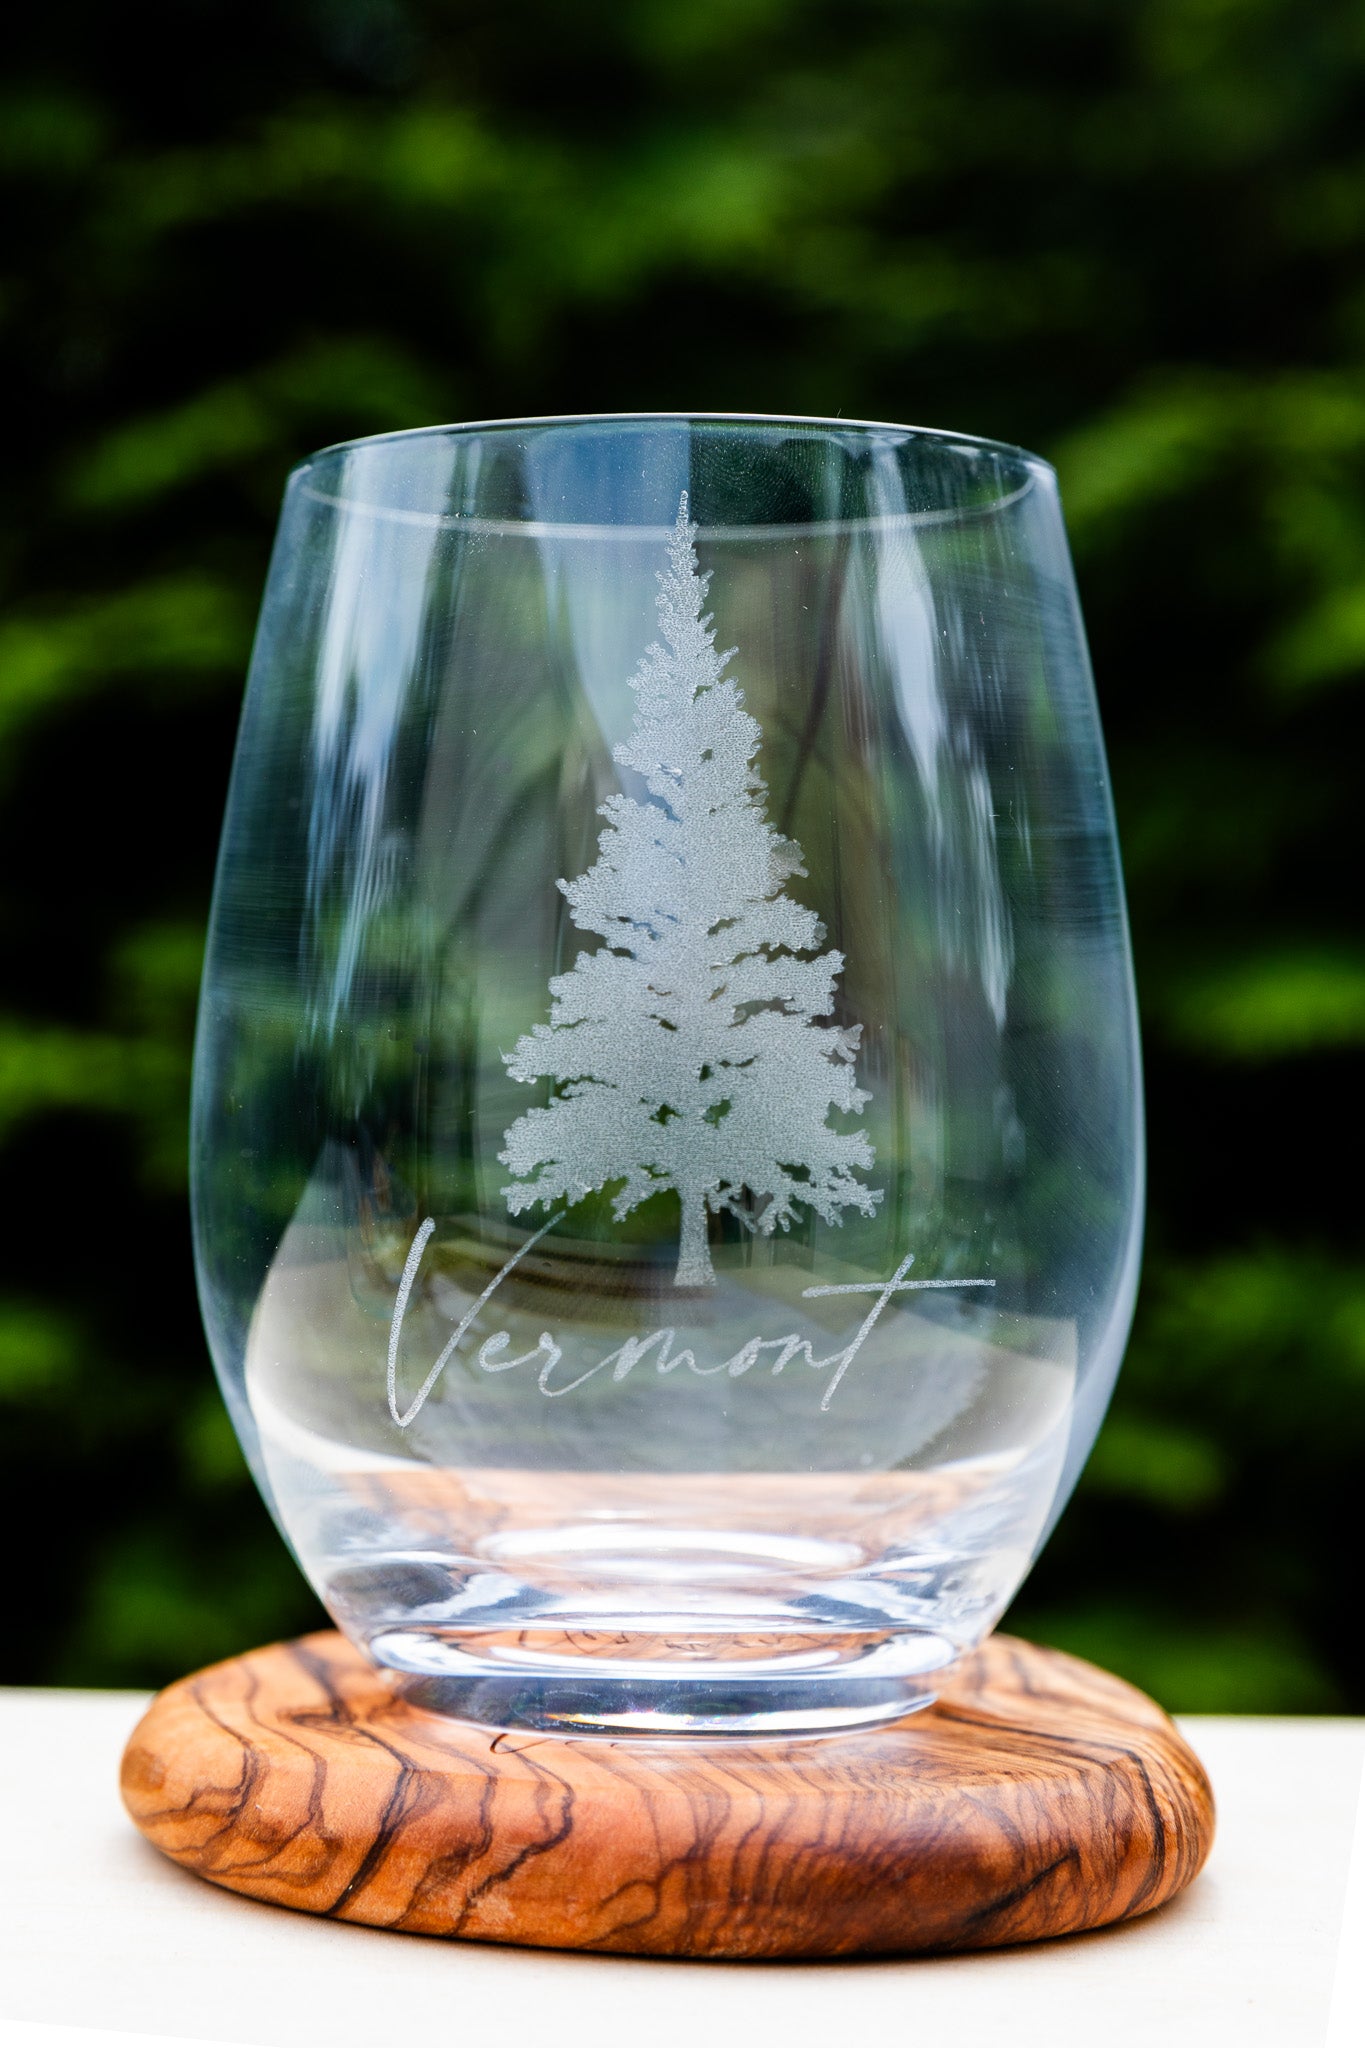 Bedazzled Christmas Tree Stemless Glass – Jersey Art Glass